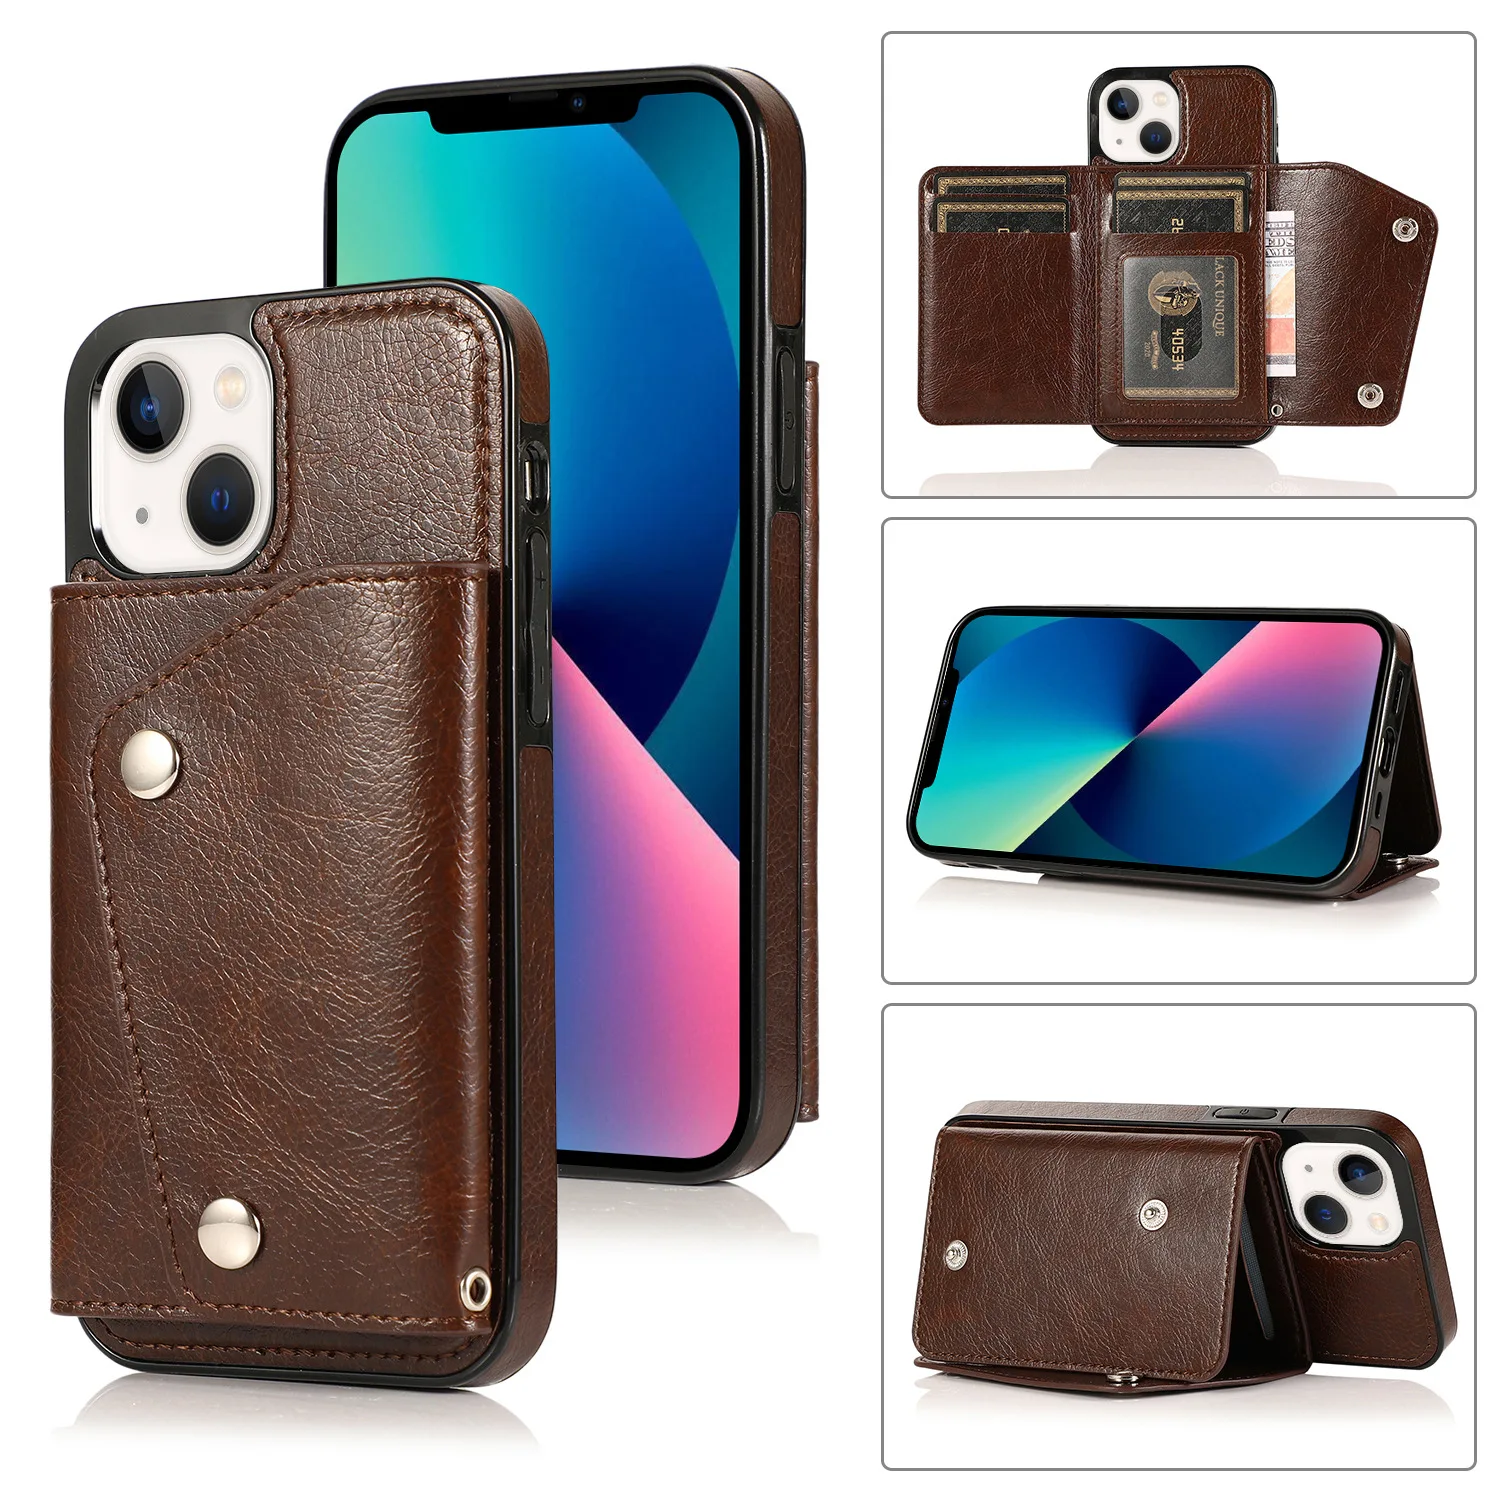 Cord clip pocket back cover shell for iPhone 14 pro max case shell for iPhone X Xs 11 12 13 Pro Max mini SE 6 7 8 Plus case